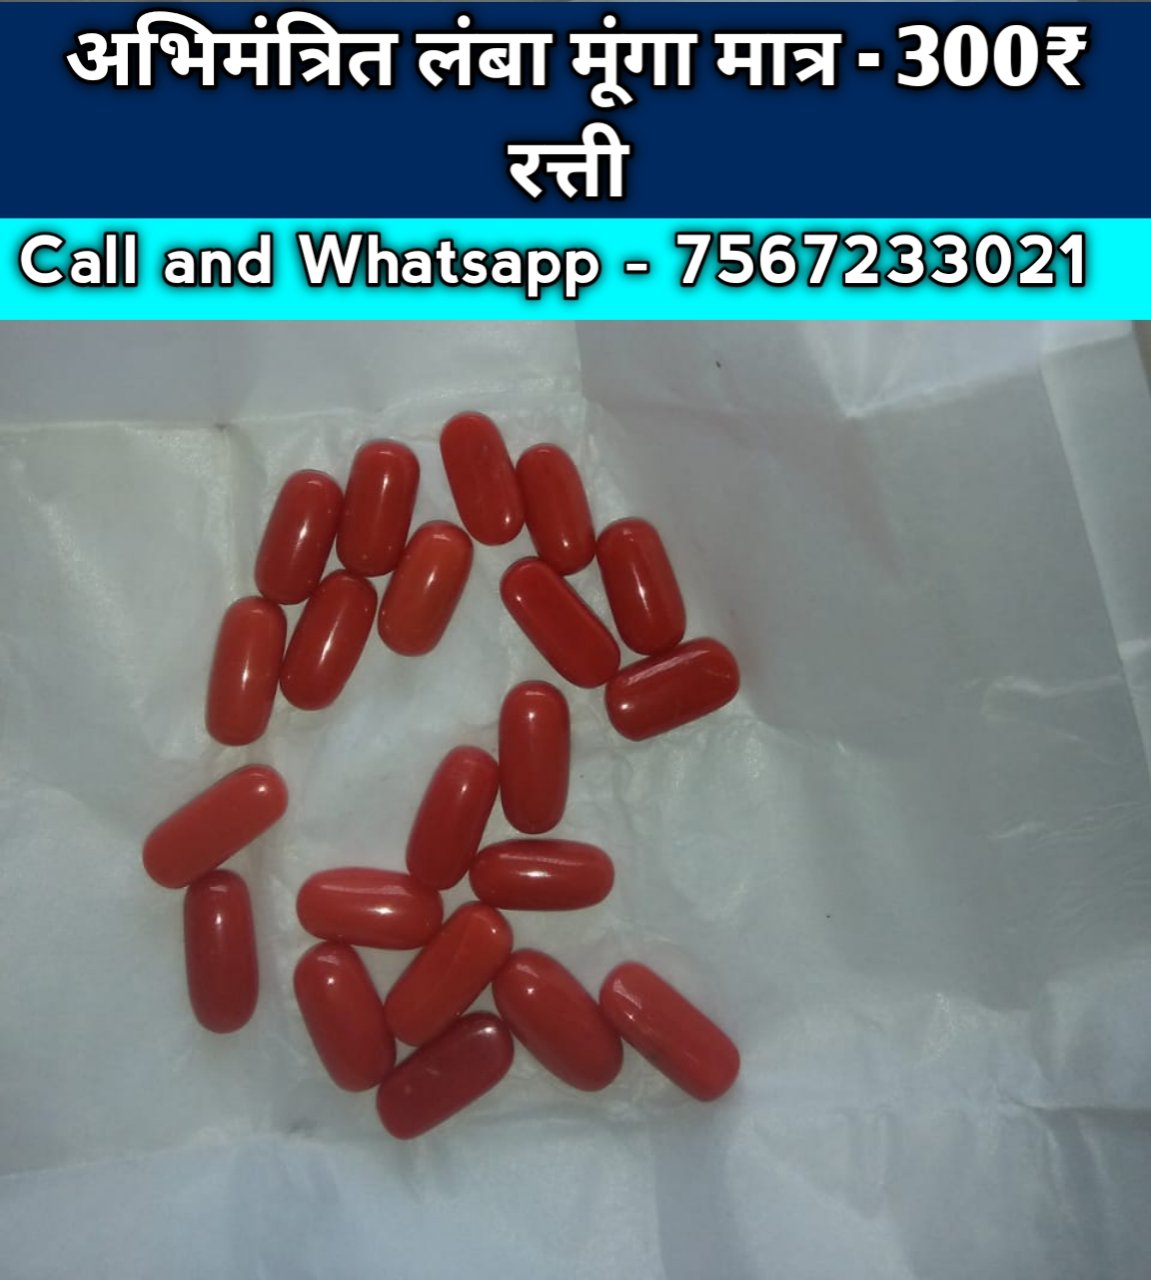 coral benefits in hindi, coral stone benefits in hindi, moonga ratan ke fayde, moonga ratna ke fayde, moonga ratna pehnne ke fayde, moonga stone ke fayde, munga ratna benefits in hindi, munga ratna kise pahnna chahiye, munga ratna pehne ke fayde, munga stone ke fayde, तिकोना मूंगा के फायदे, मूंगा रत्न के फायदे, मूंगा रत्न के फायदे इन हिंदी, मूंगा रत्न धारण करने के फायदे, मूंगा रत्न पहनने के फायदे, मूंगा रत्न पहने के फायदे, लाल मूंगा पहनने के फायदे, सफेद मूंगा के फायदे